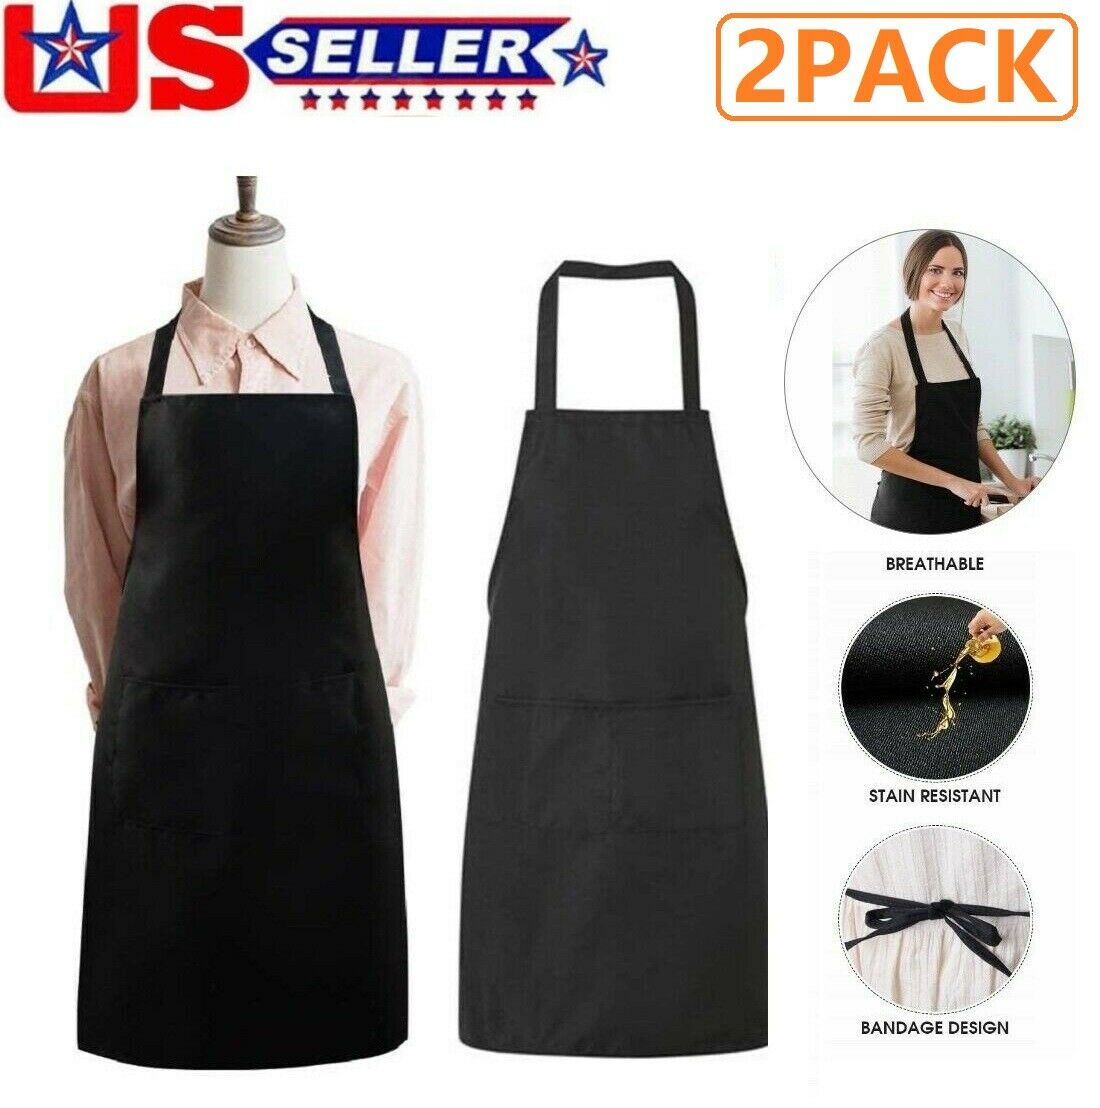 2 Pack Cooking Kitchen Aprons Work Apron With 2 Pockets for Men Women Black Chef